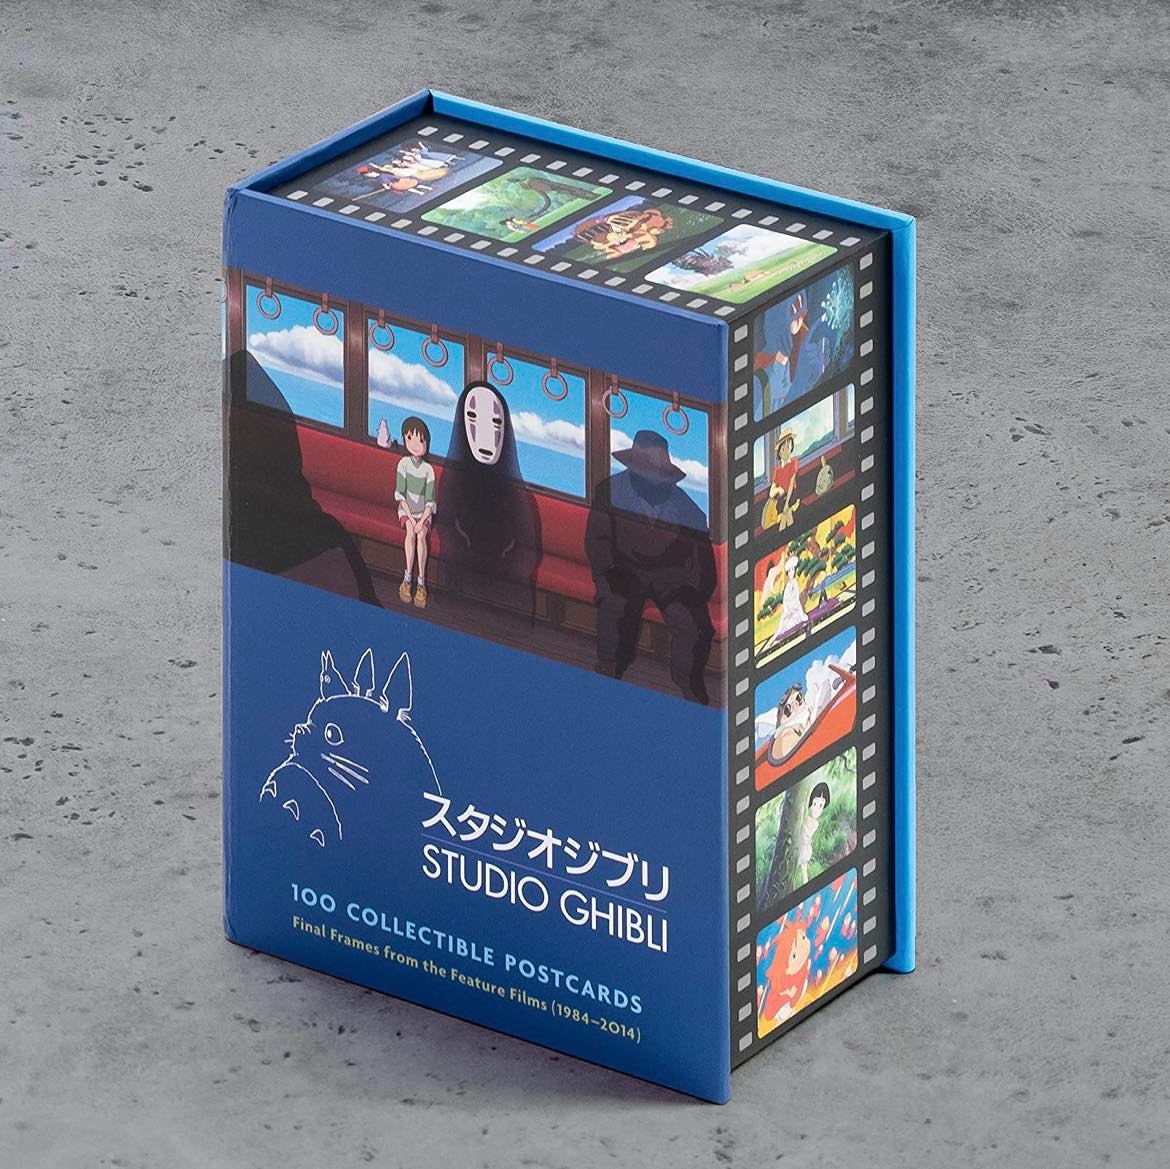 Studio Ghibli: 100 Collectible Postcards (unboxing+review) Ind/Eng Sub 